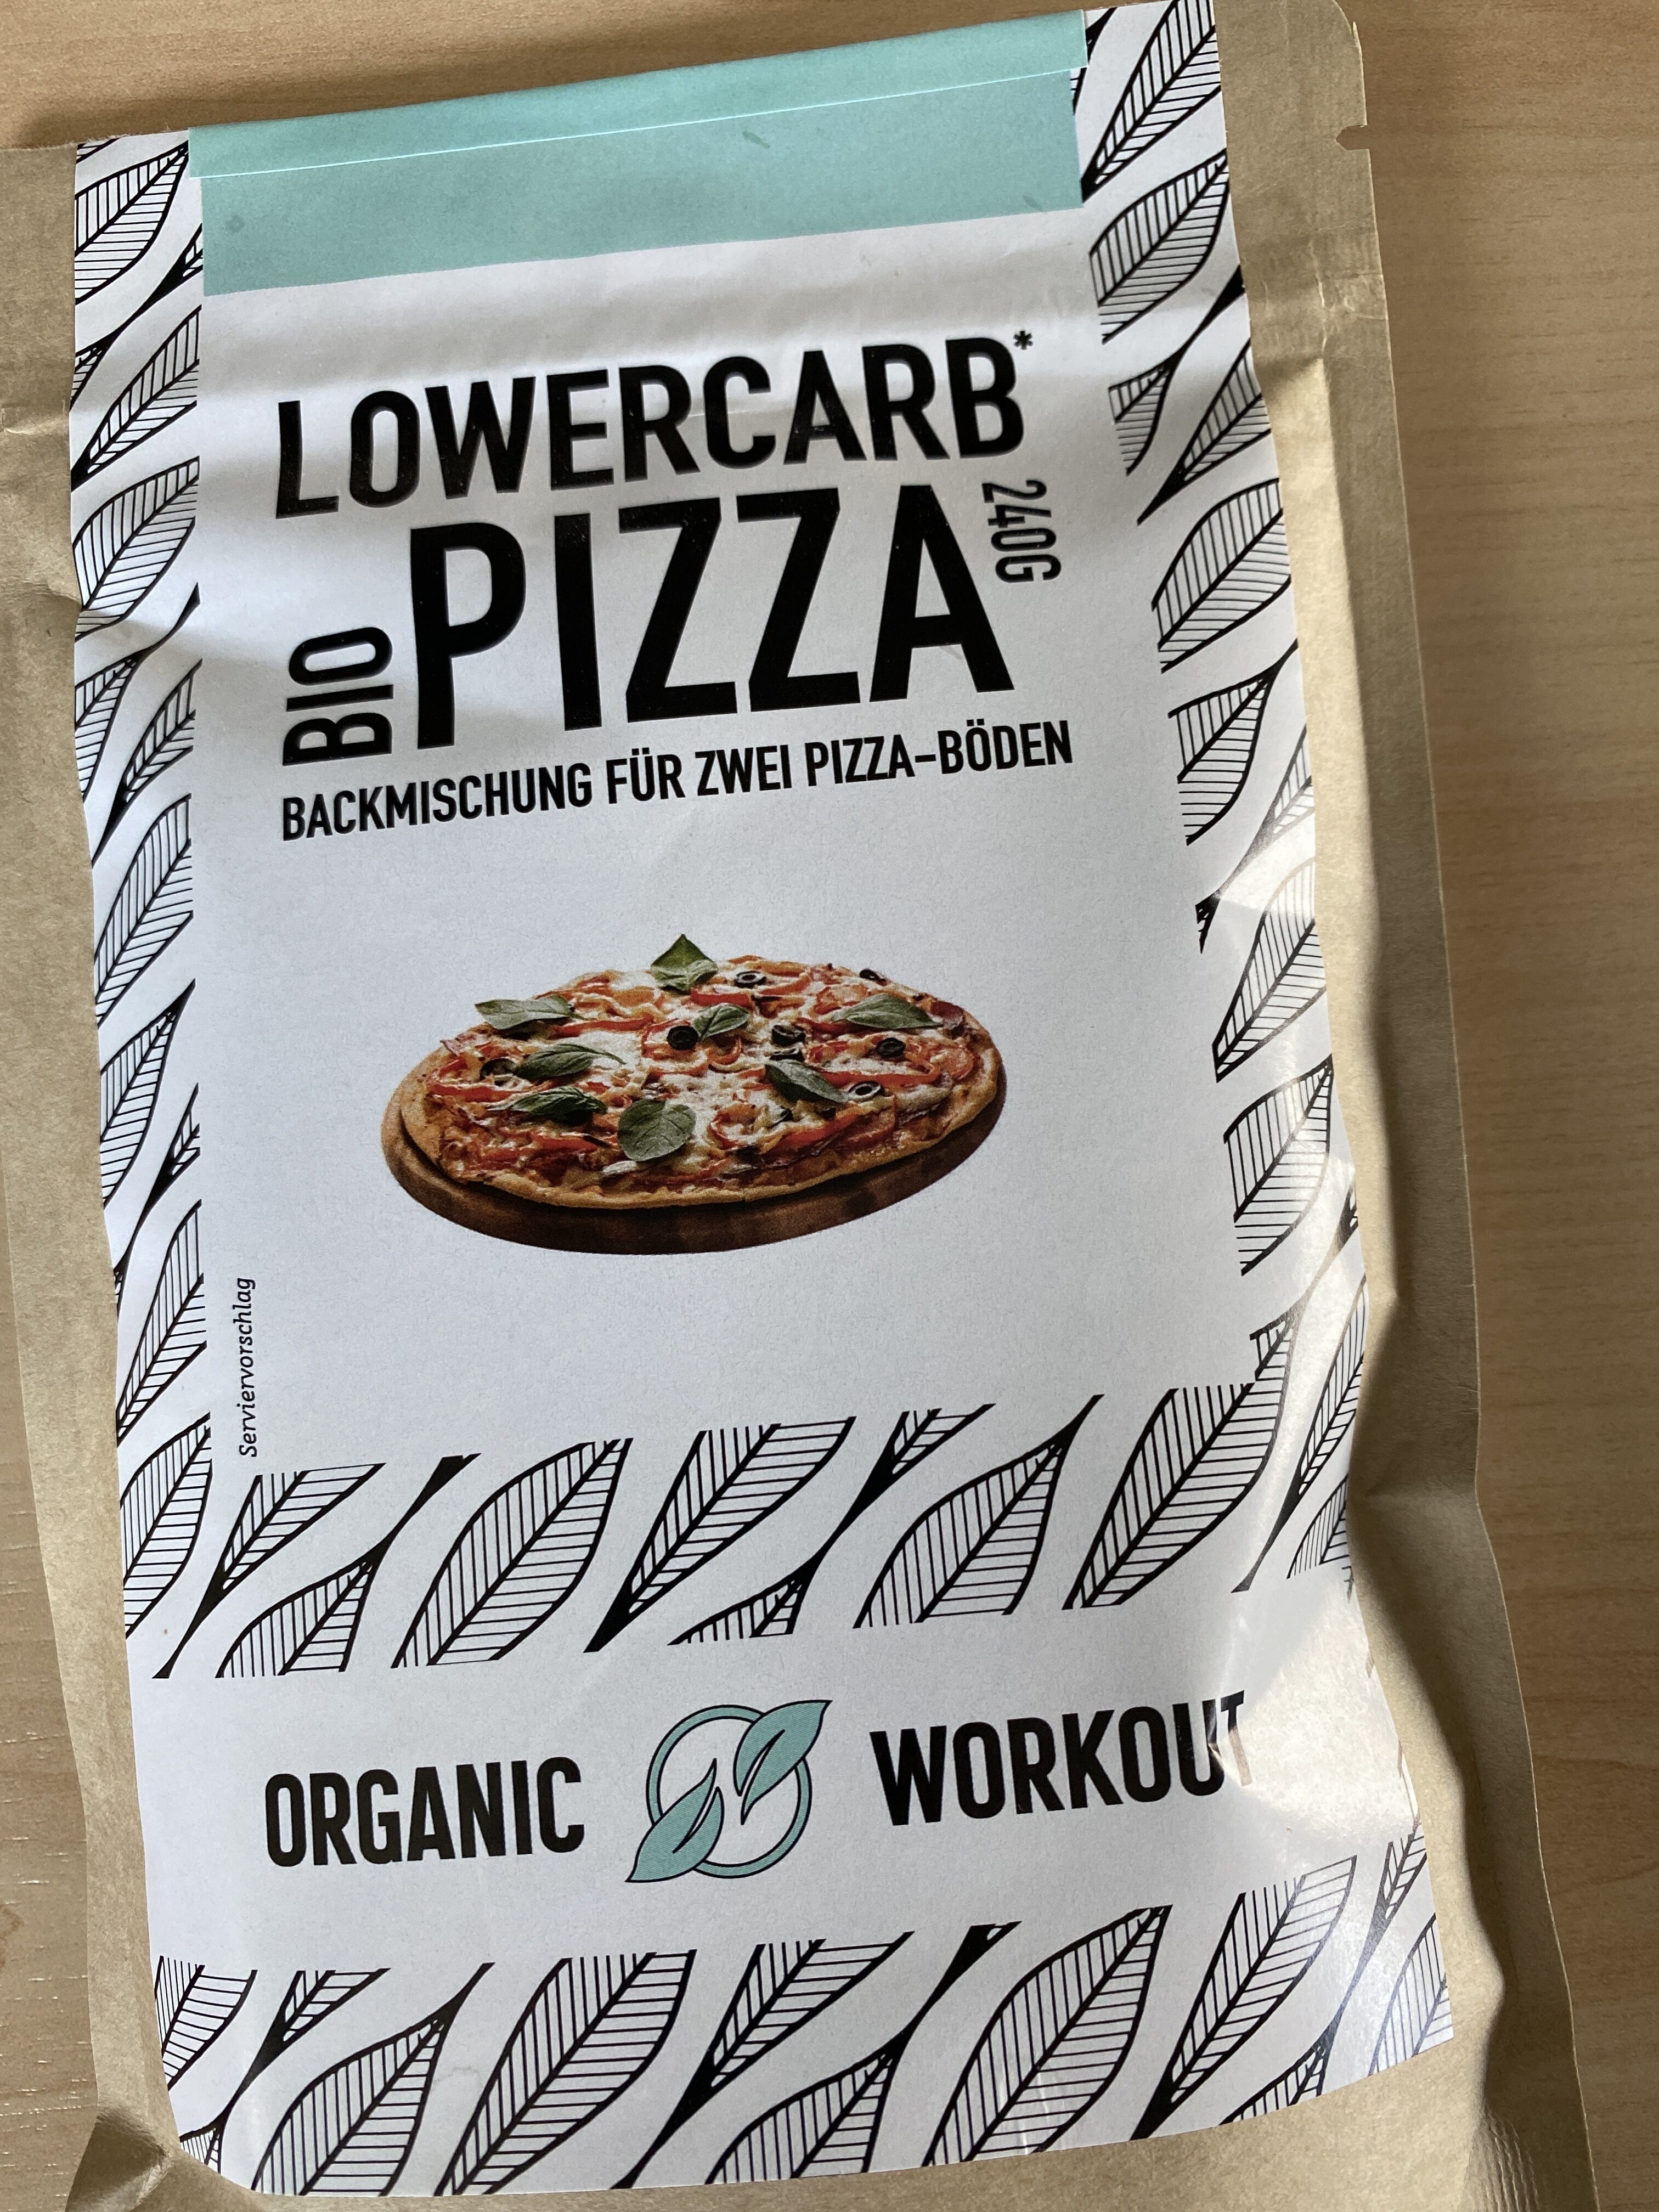 Lowercarb Pizza organic workout - Produkt